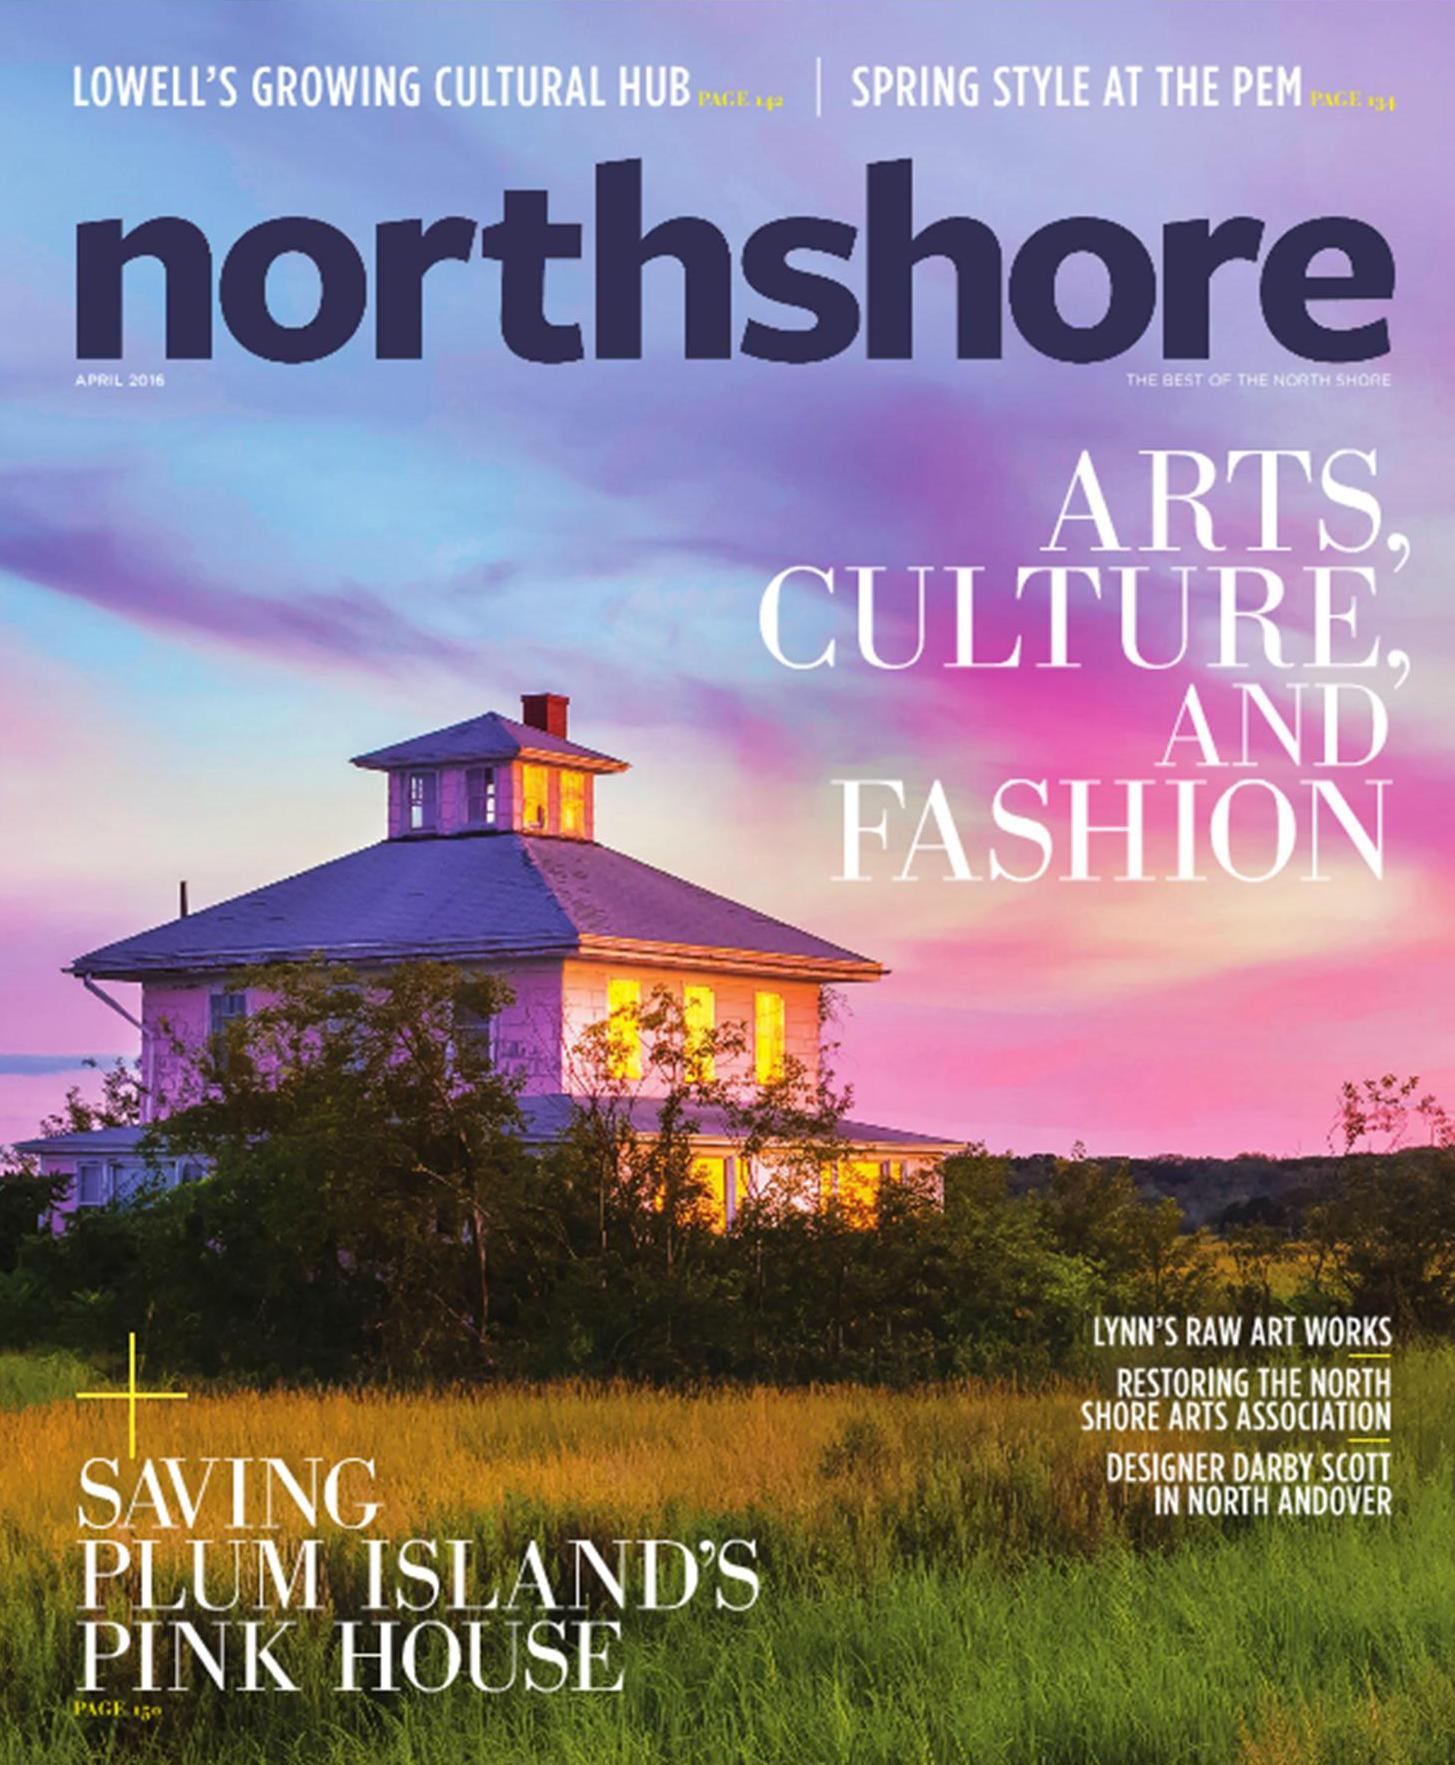 Oliver Brothers art restoration and conservation featured in the Northshore Magazine